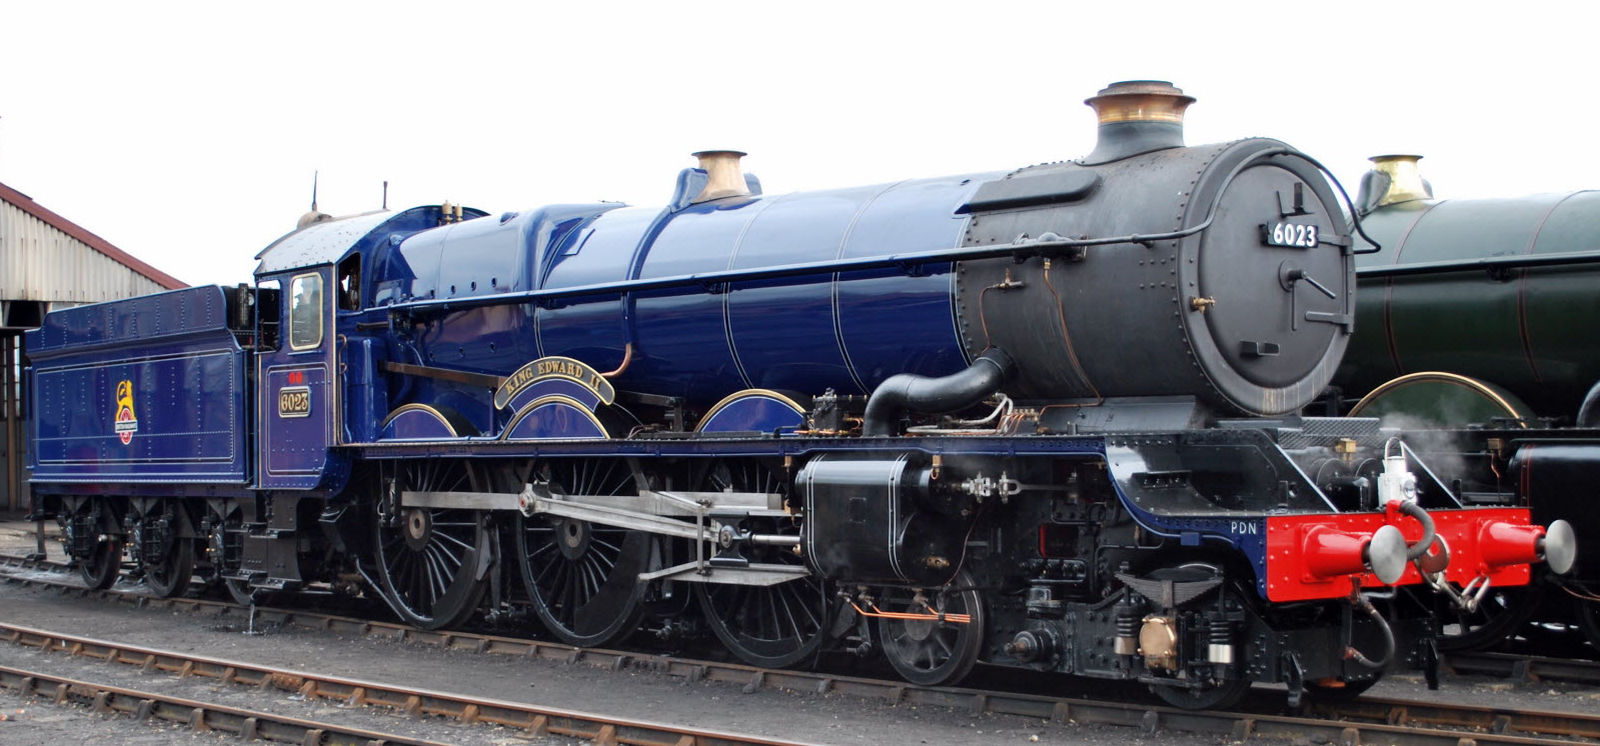 No. 6023 “King Edward II” in Caledonian Blue in April 2011 in Didcot